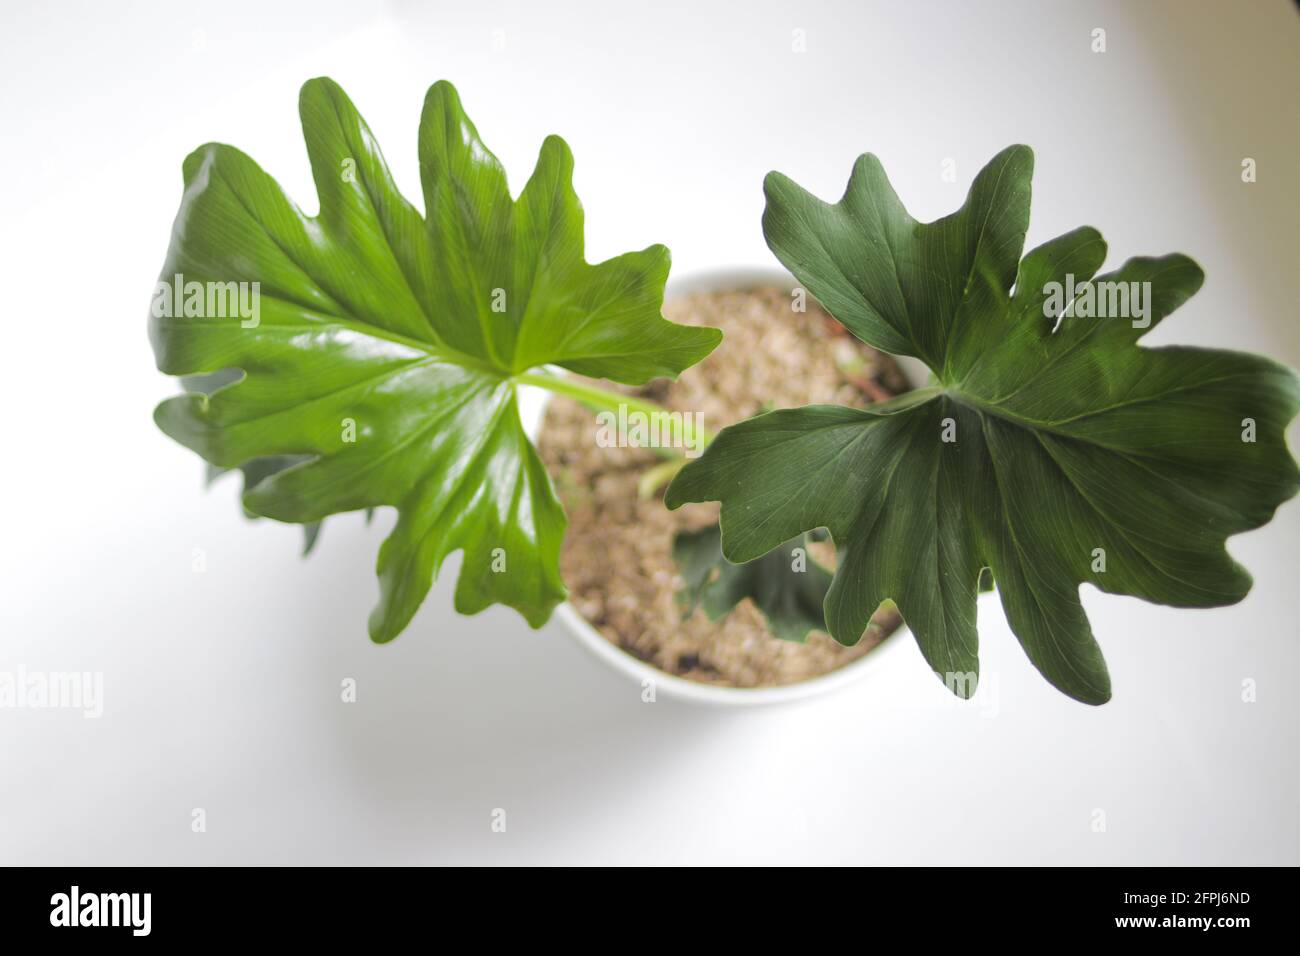 Tropical philodendron selloum on white background. Close-up view of leaves. houseplant for home decor. Stock Photo